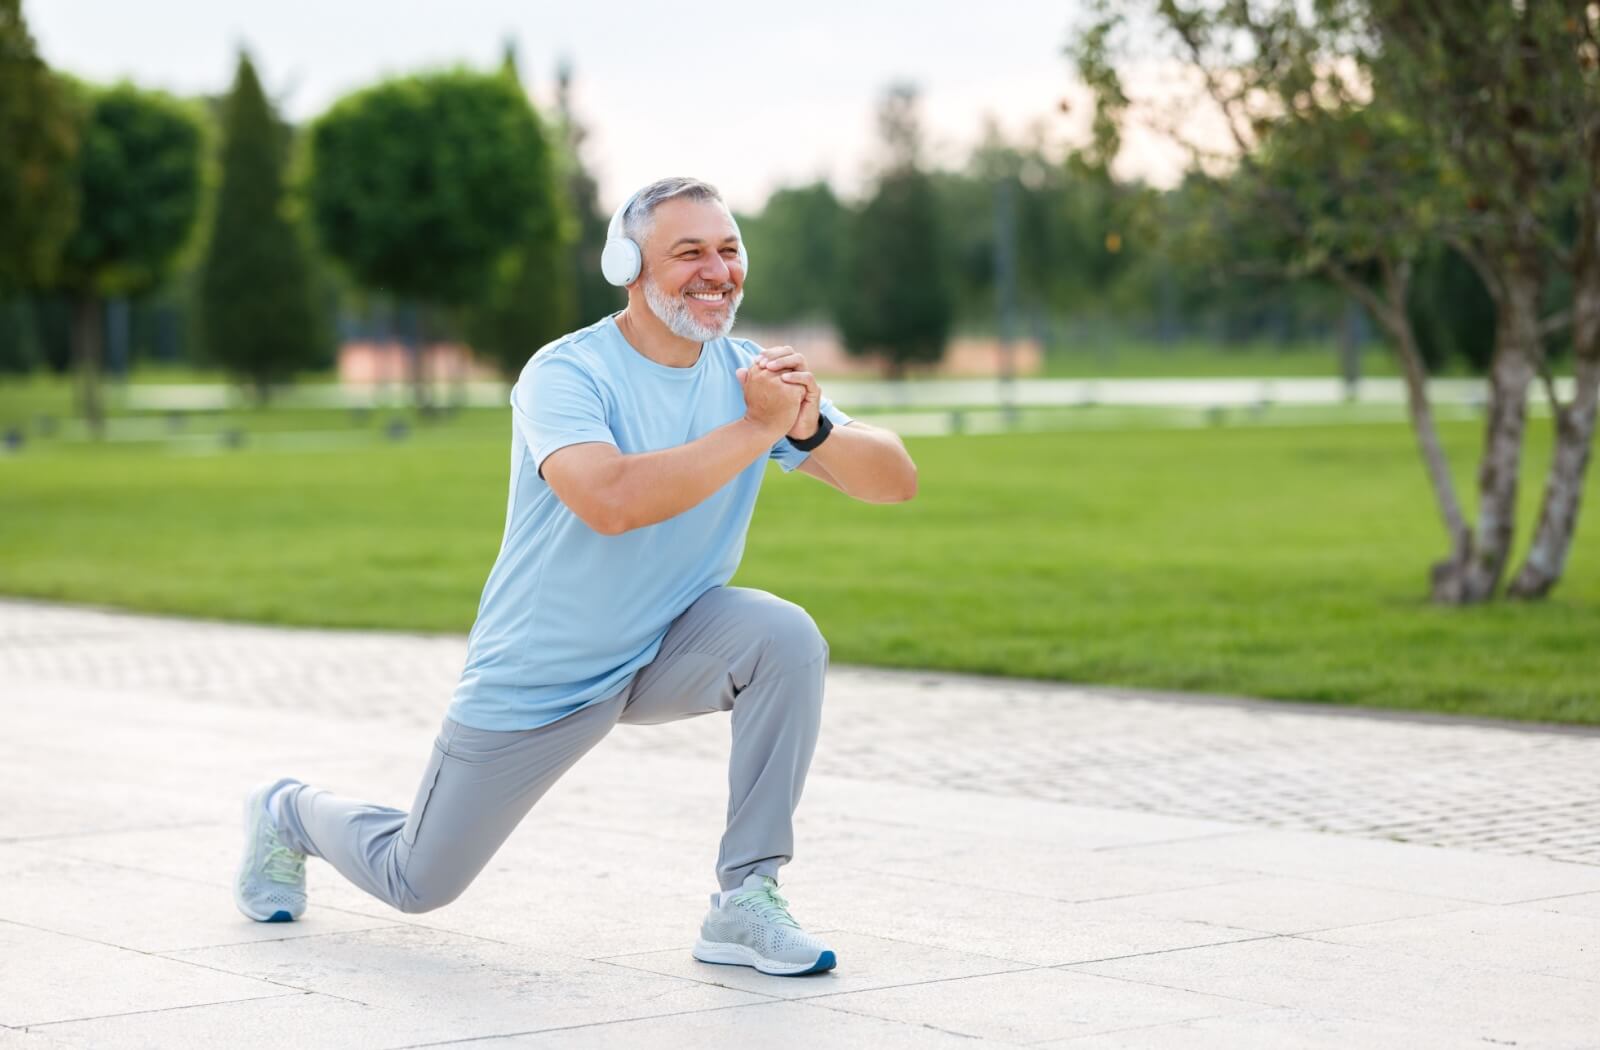 An older adult man warming up for his exercise in a park.